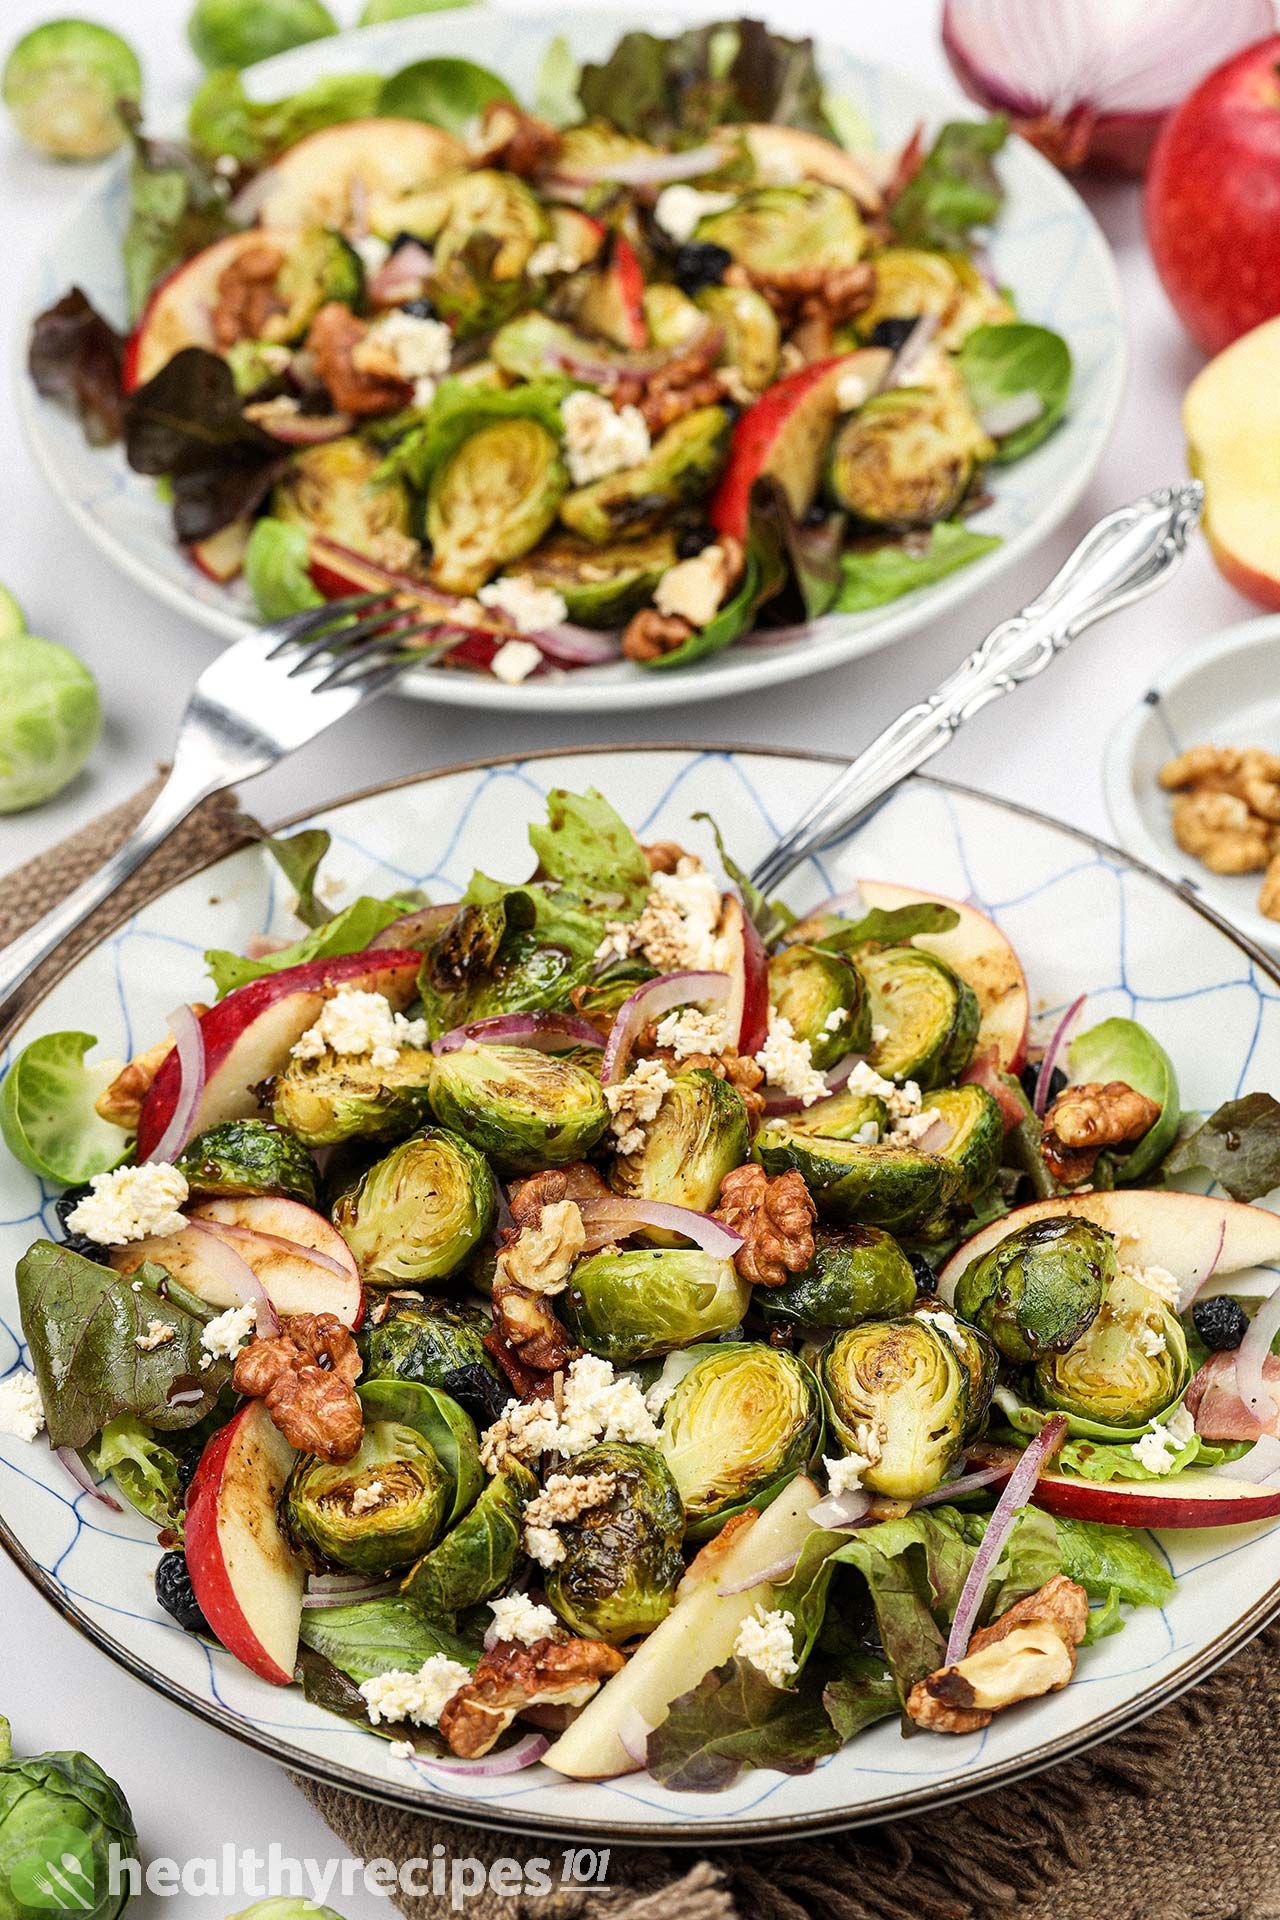 How to Choose the Brussels Sprouts